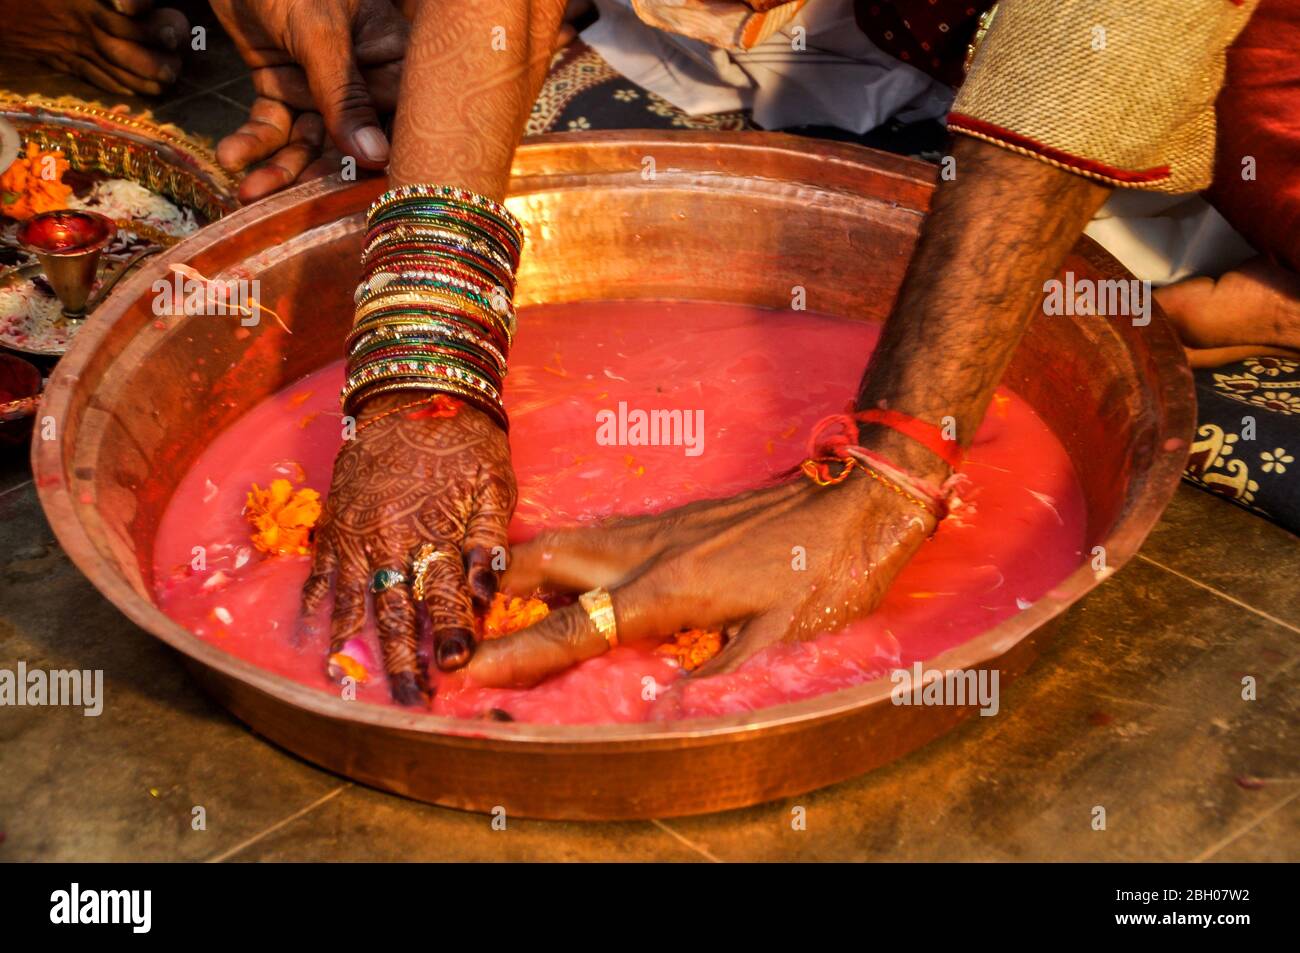 Indian wedding traditional game searching for ring in Plate, Indian marriage traditions Stock Photo